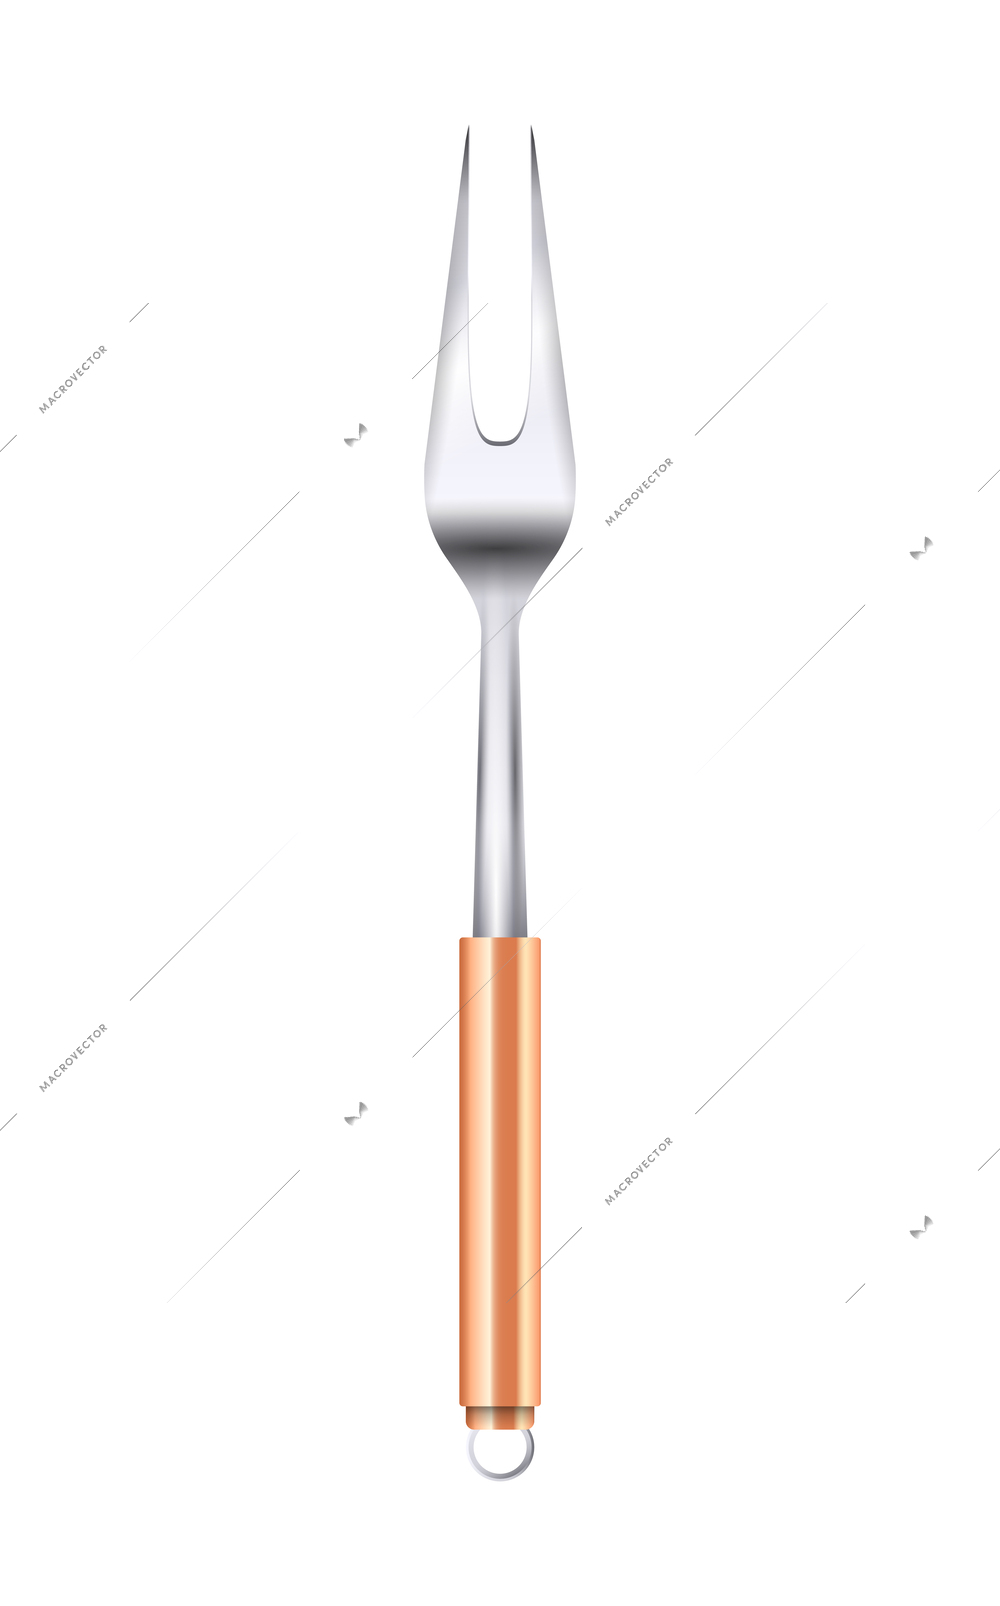 Realistic kitchenware cookware composition with isolated image of kitchen cooking utensil vector illustration